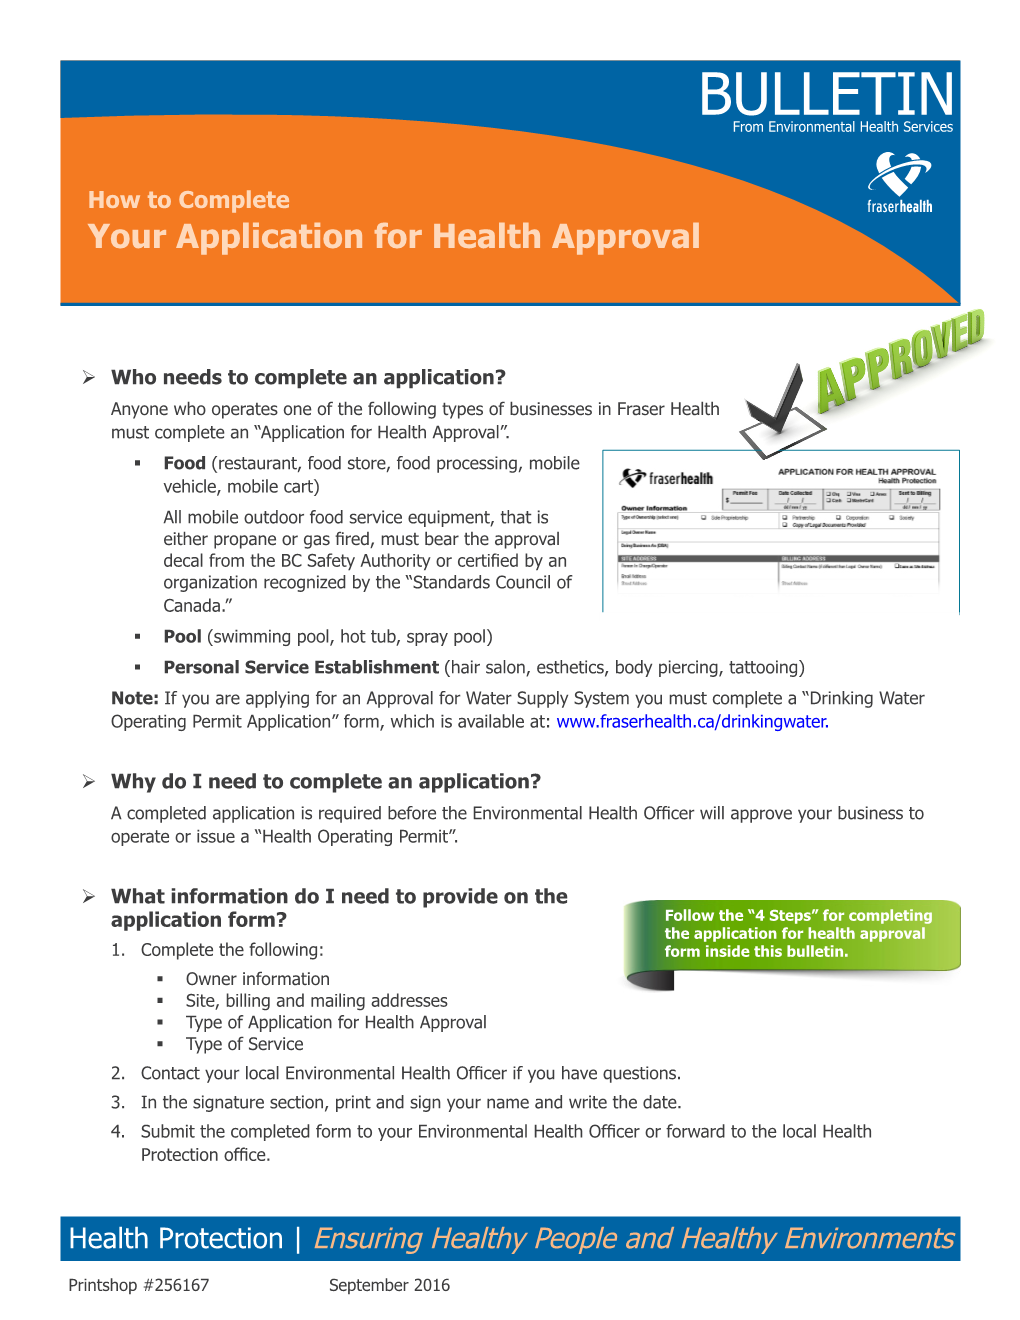 How to Complete Your Application for Health Approval